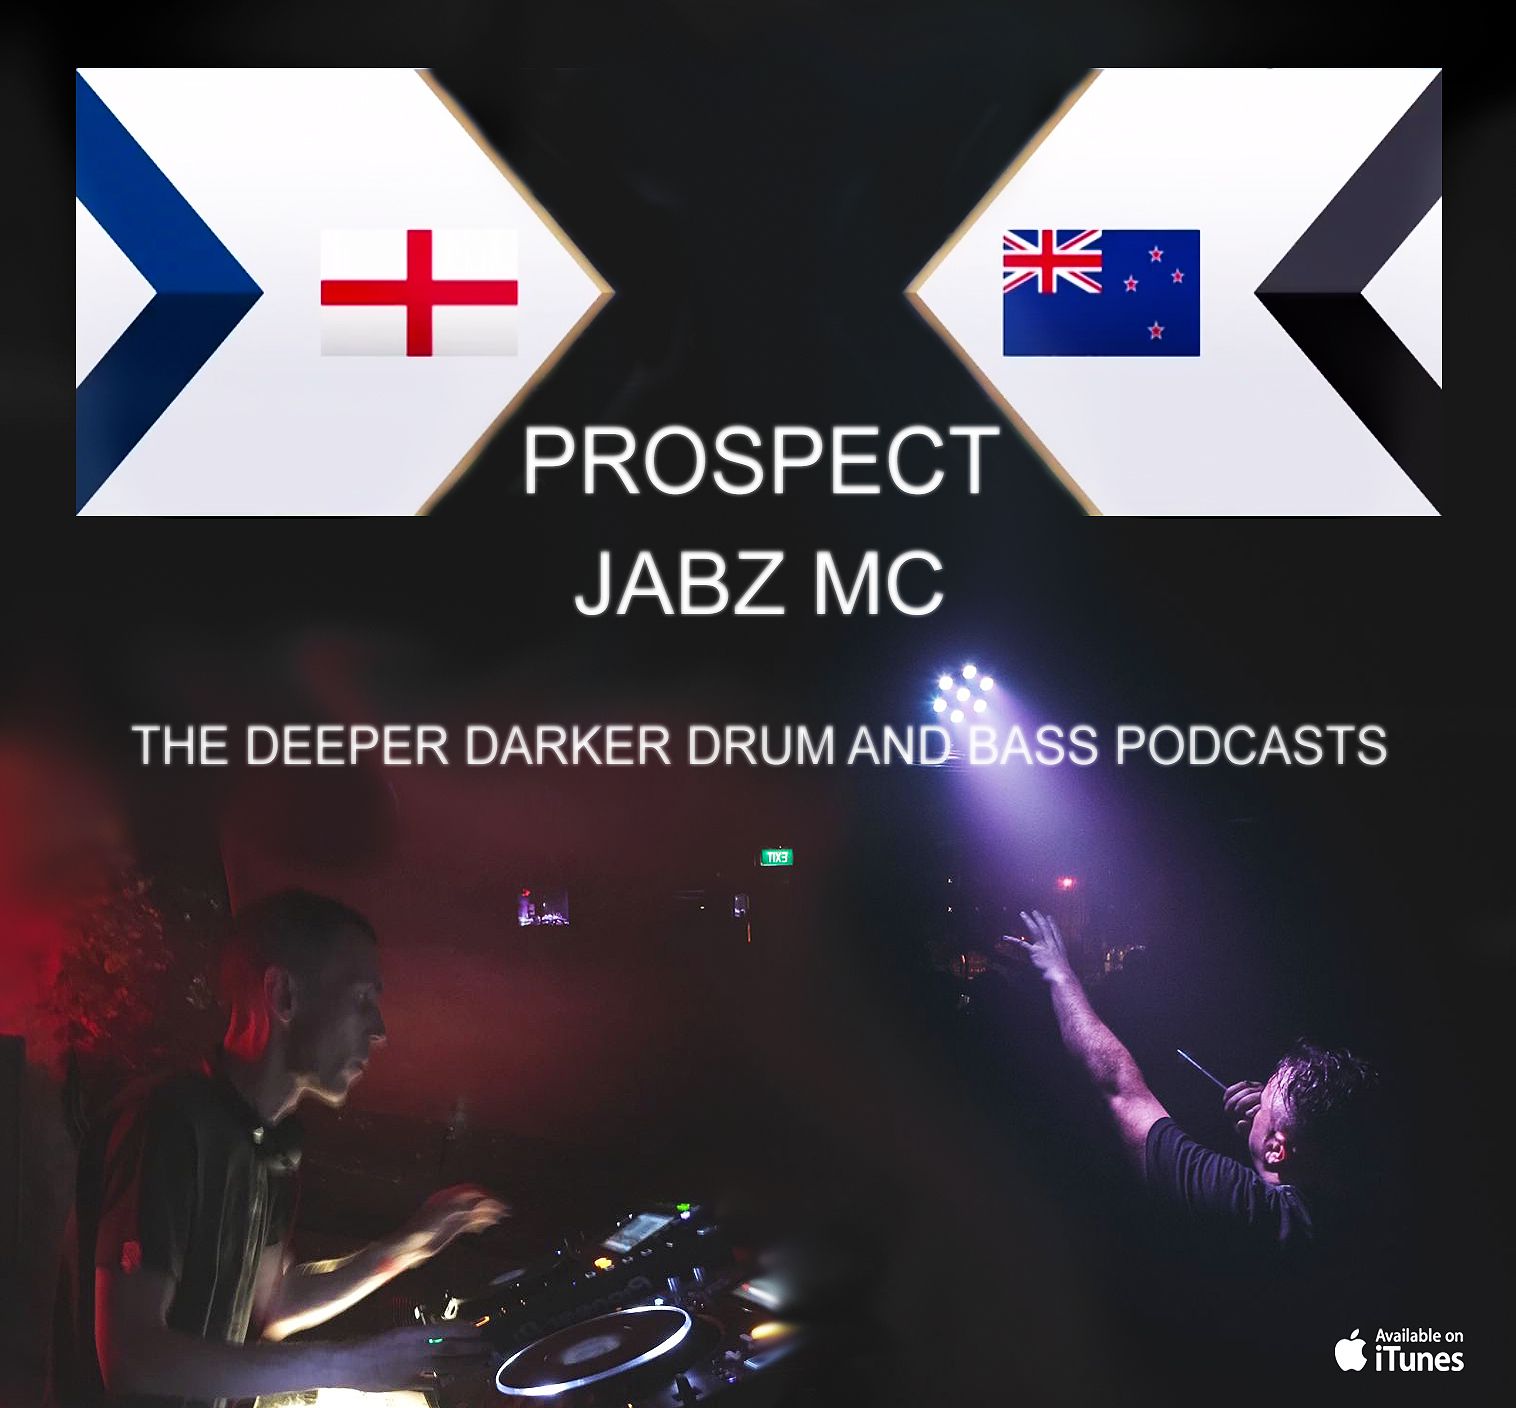 PROSPECT AND JABZ MC - THE DEEPER DARKER DRUM AND BASS PODCASTS - FEB 2020